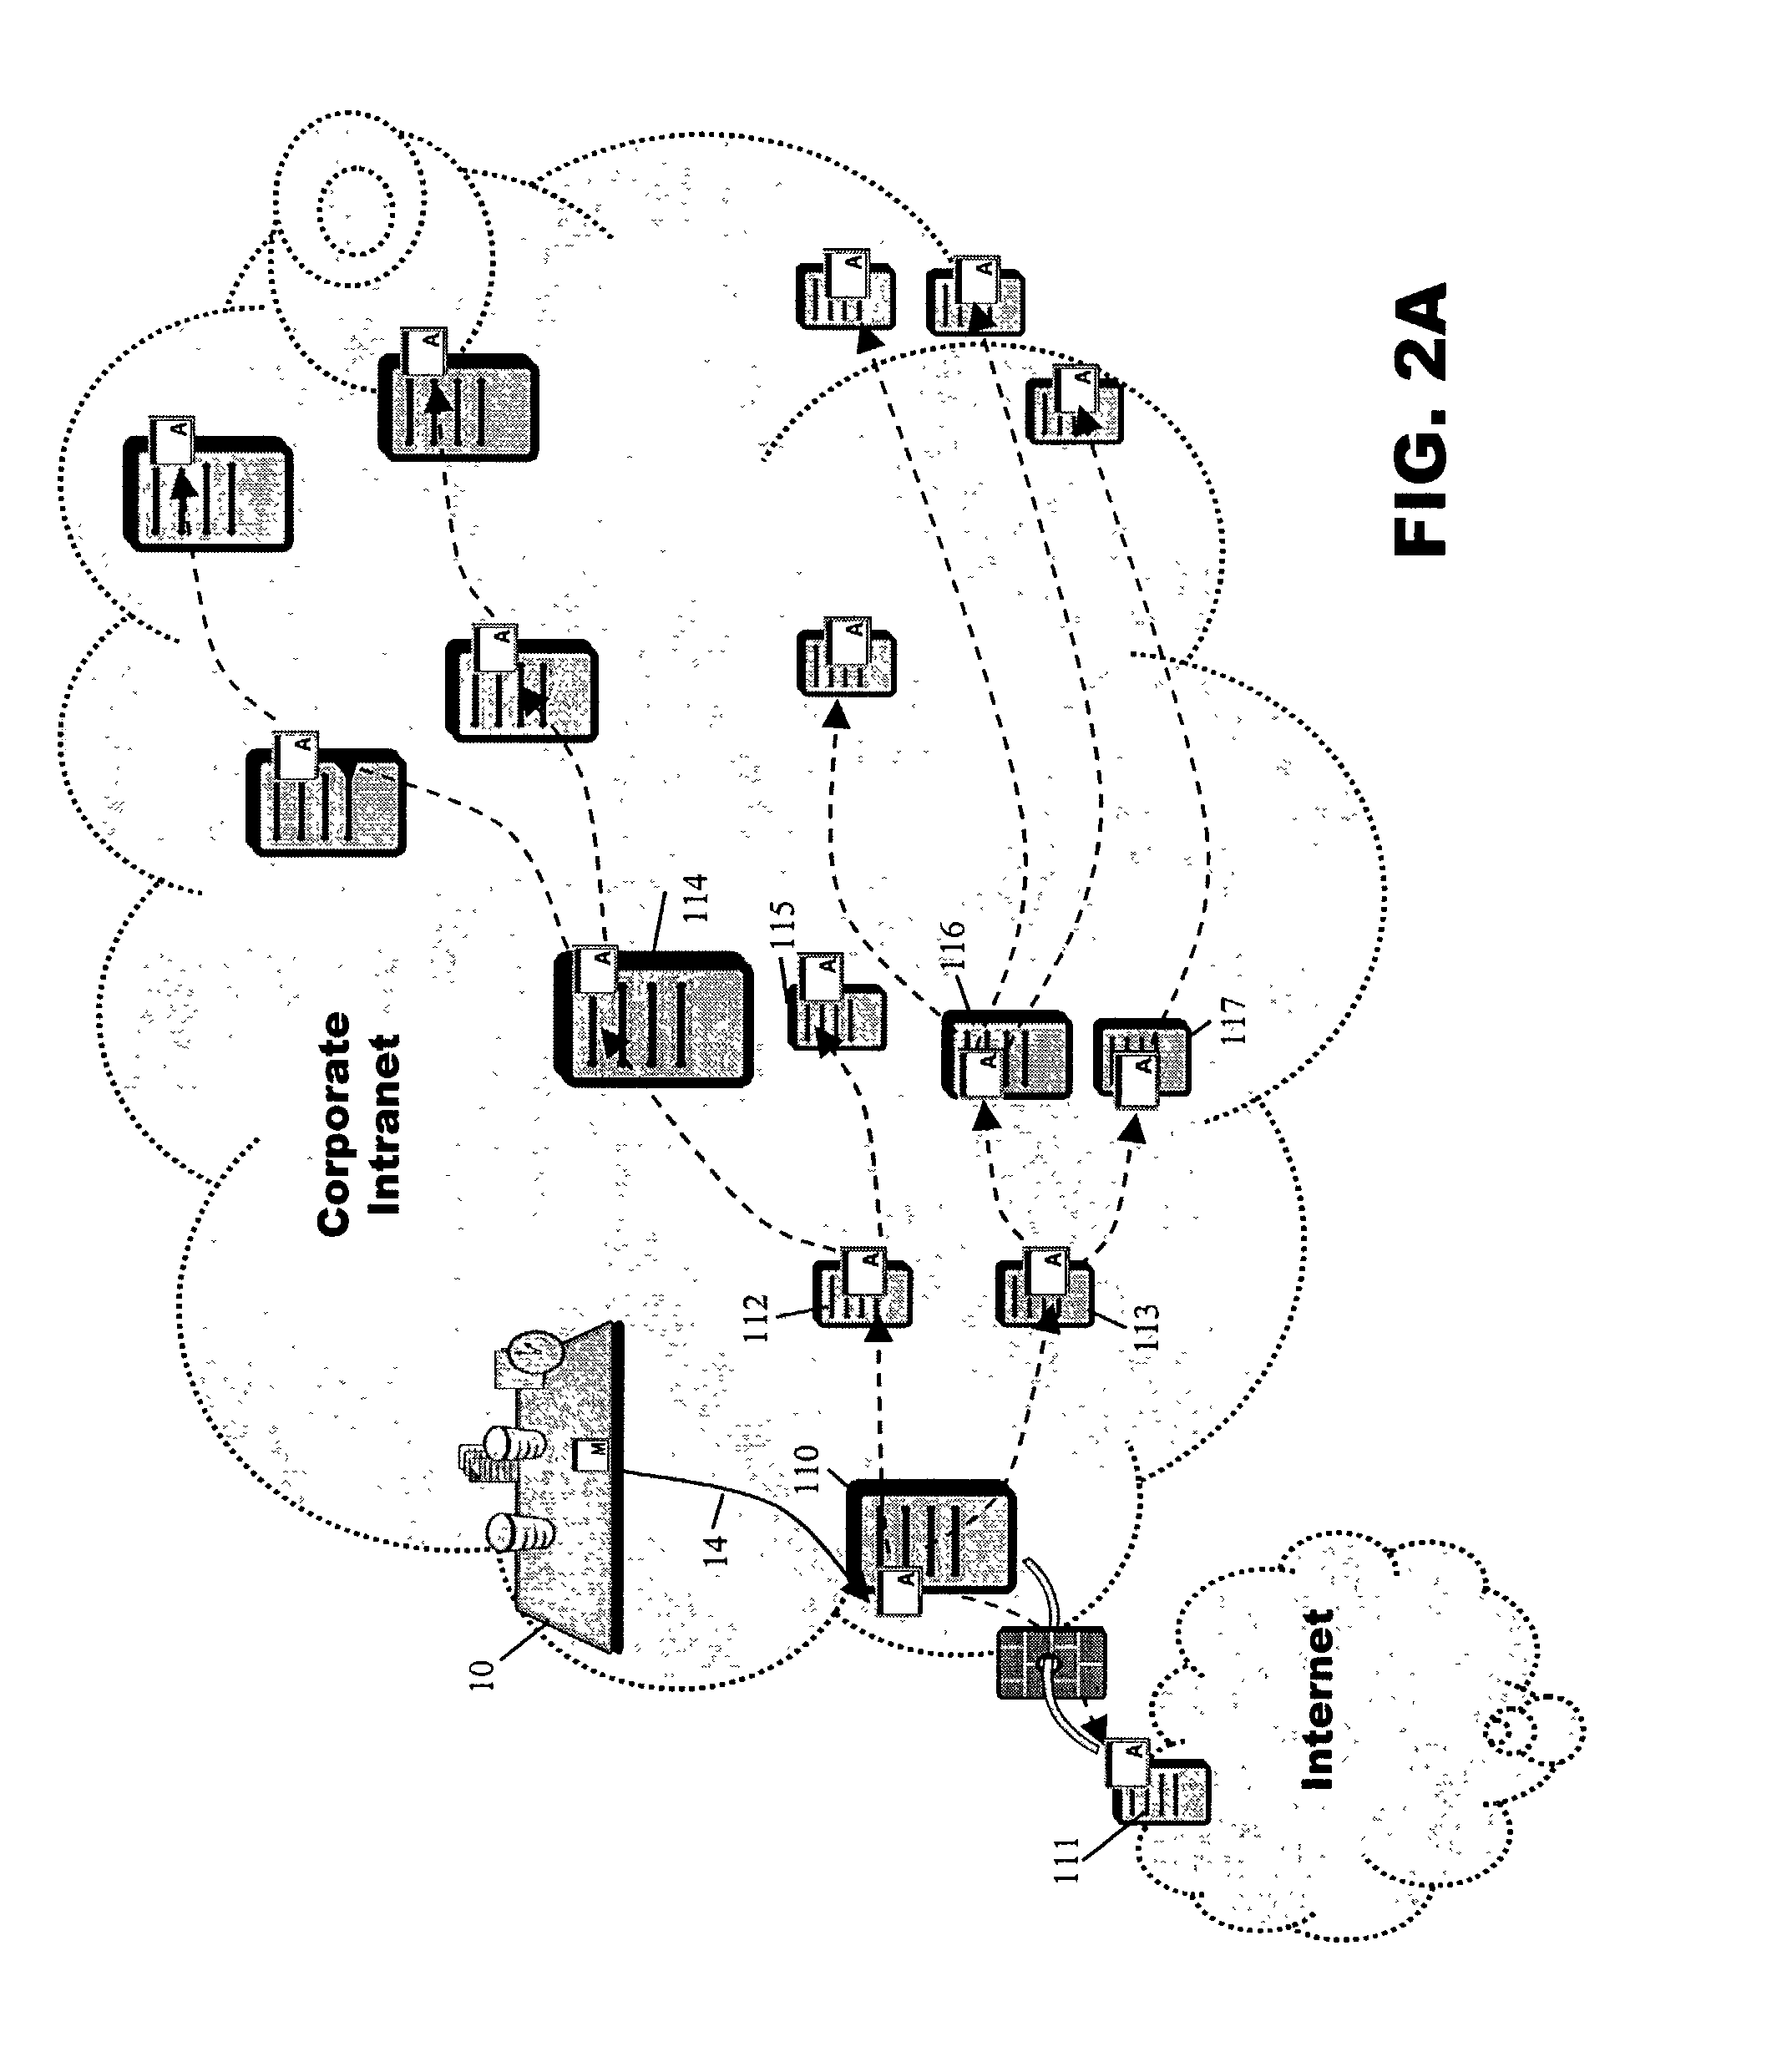 Data transfer system and method with secure mapping of local system access rights to global identities